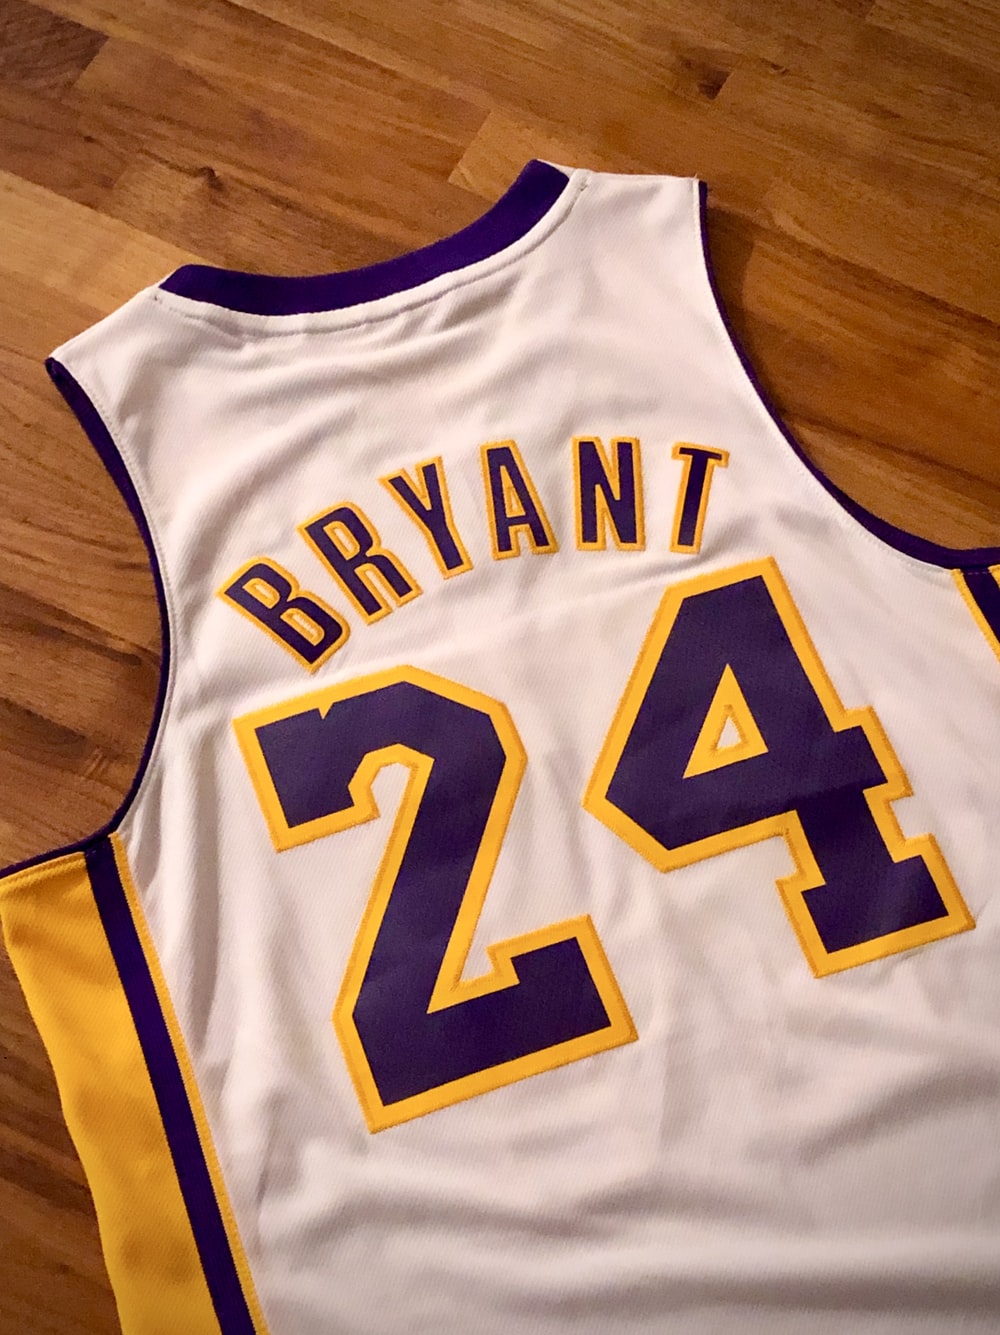 Bryant Picture. Download Free Image